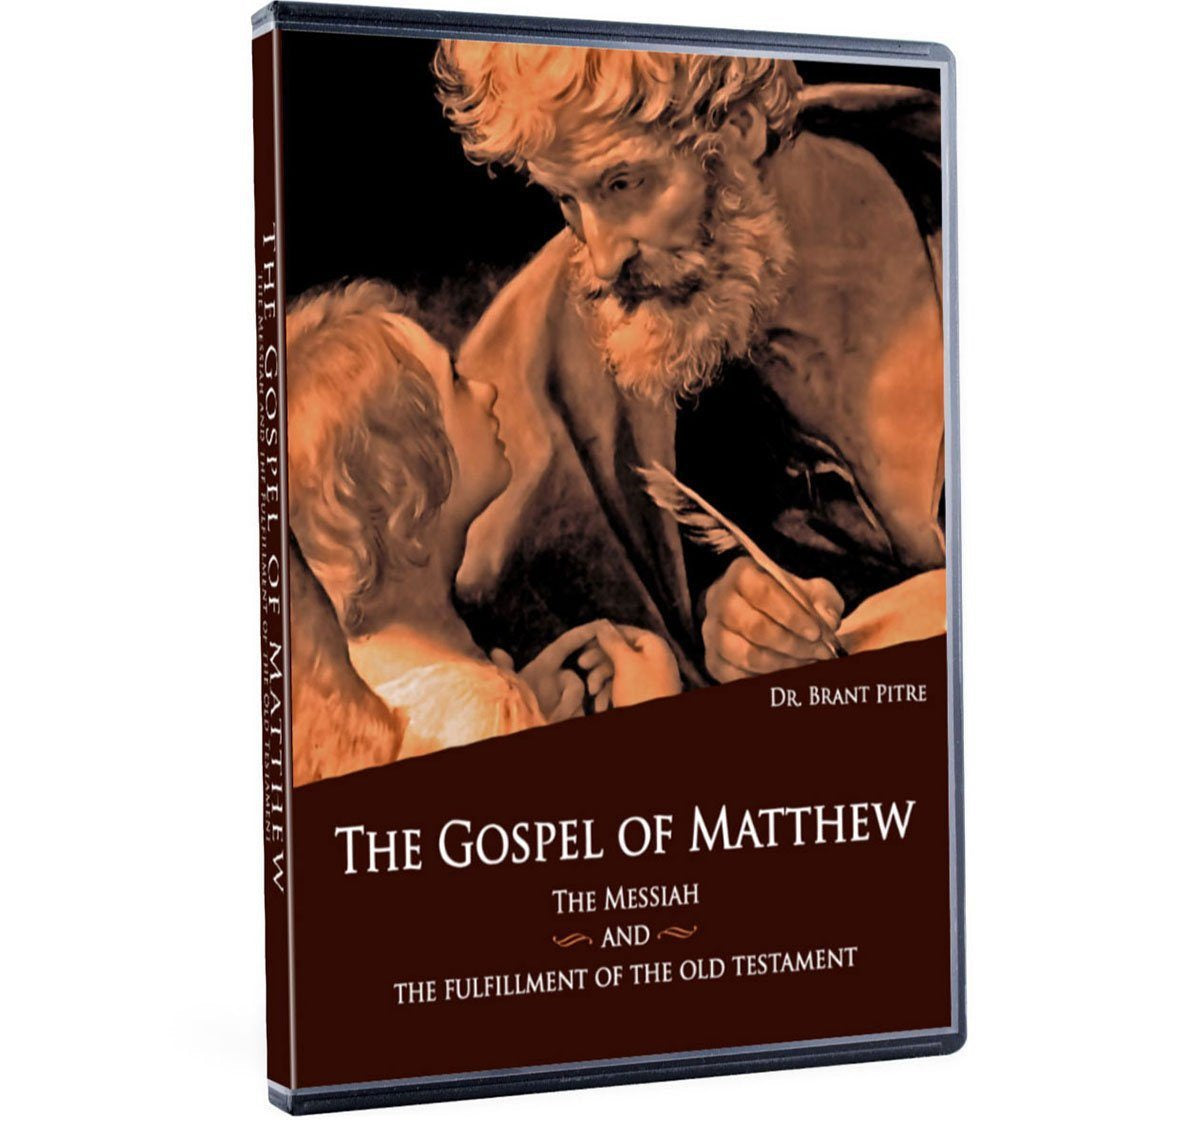 A Bible study on the Gospel of Matthew, exploring the fulfillment of Old Testament Prophecy (CD).